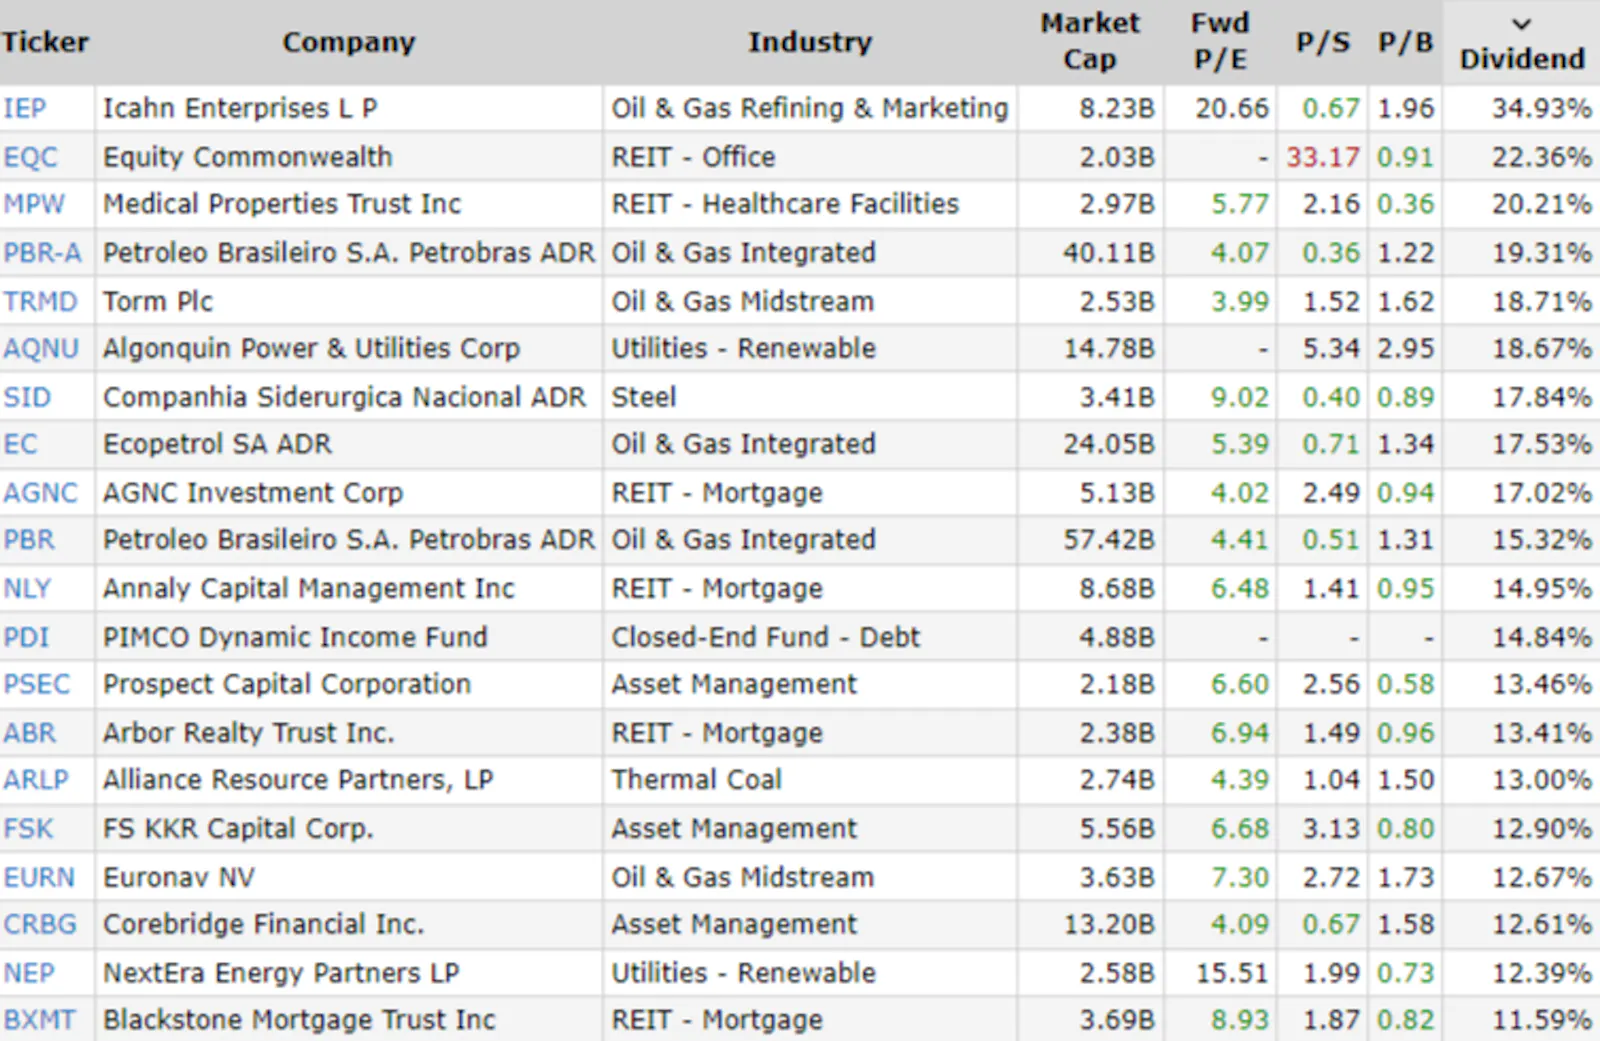 A List of 20 Mega-Yielding Stocks with 10% or more in Dividend Yield. Stocks with high dividends and high yield.